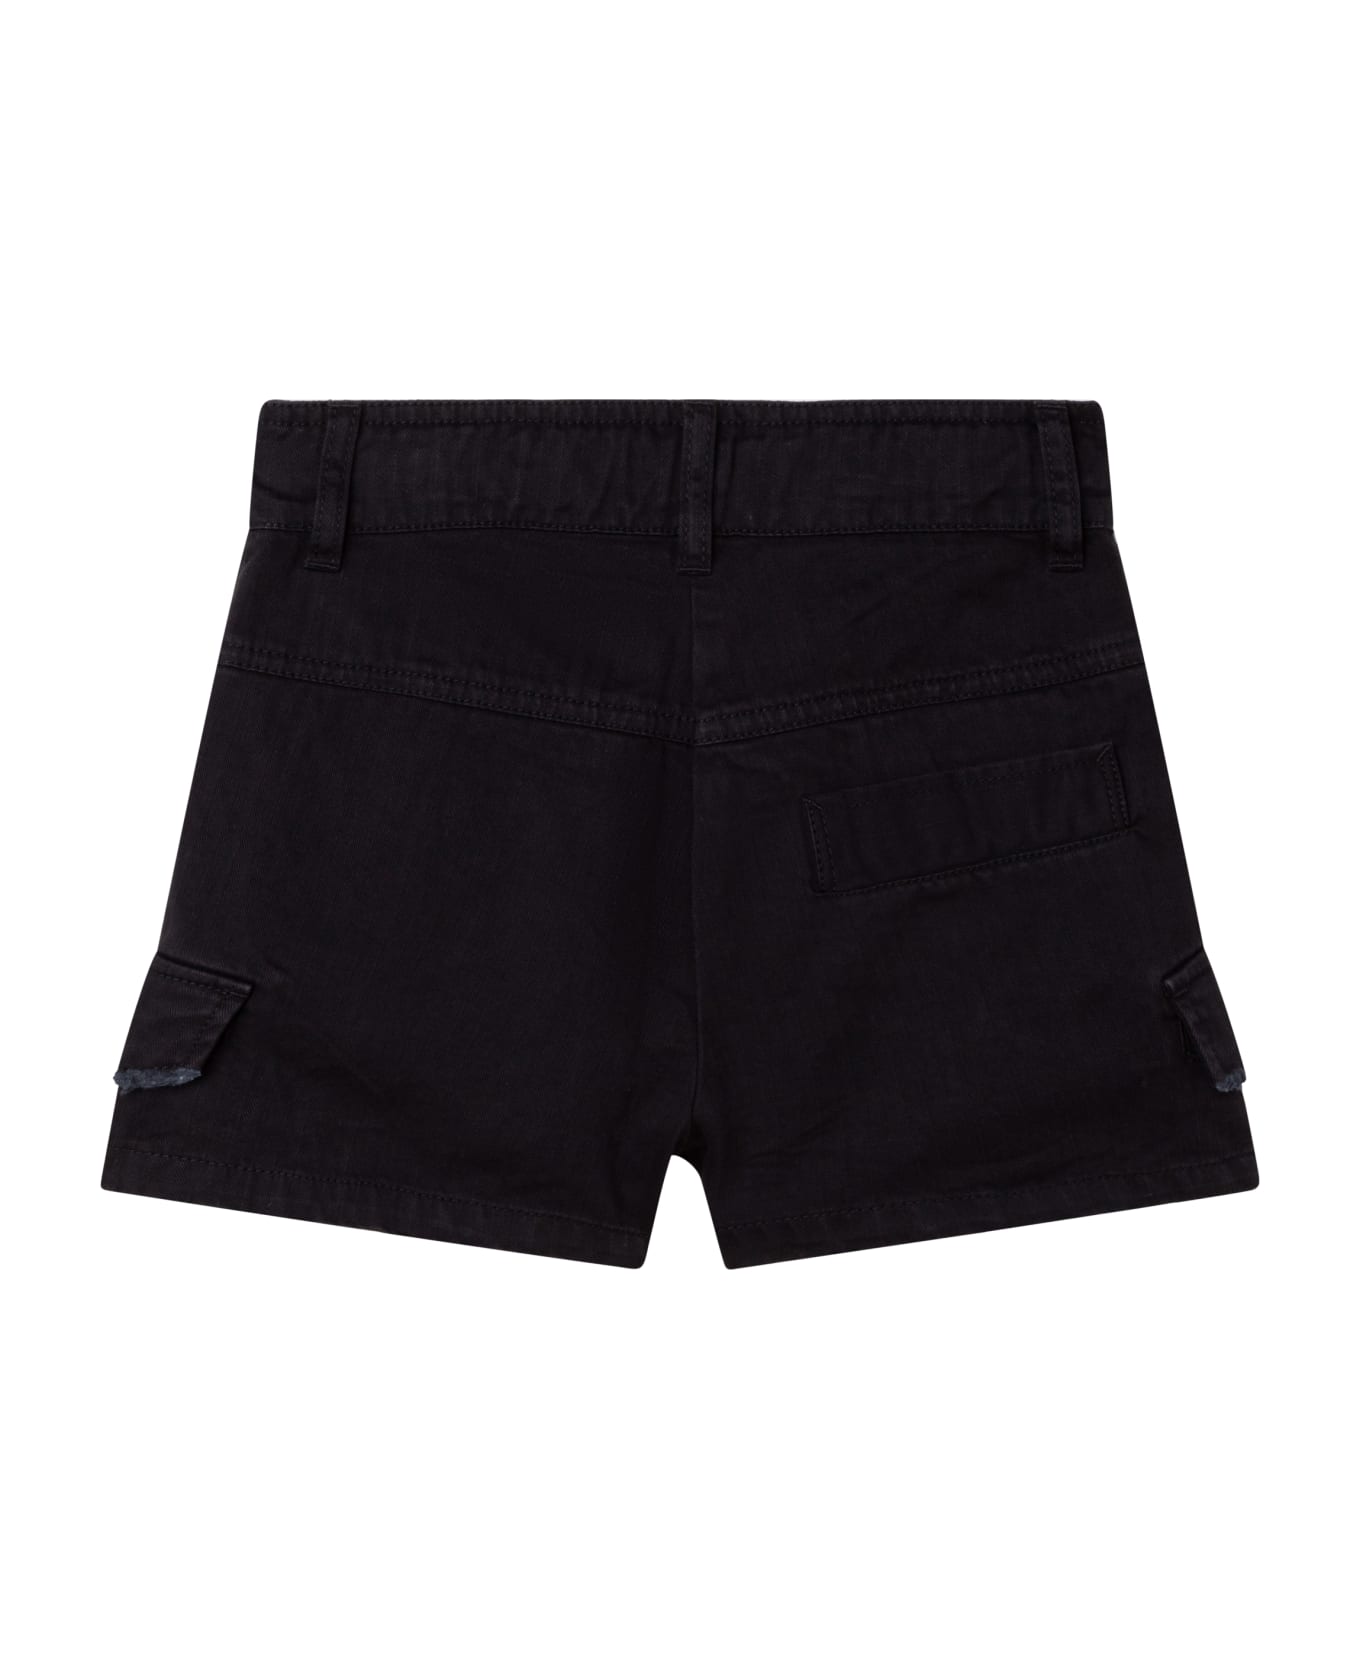 Zadig & Voltaire Shorts With Pockets - Black ボトムス